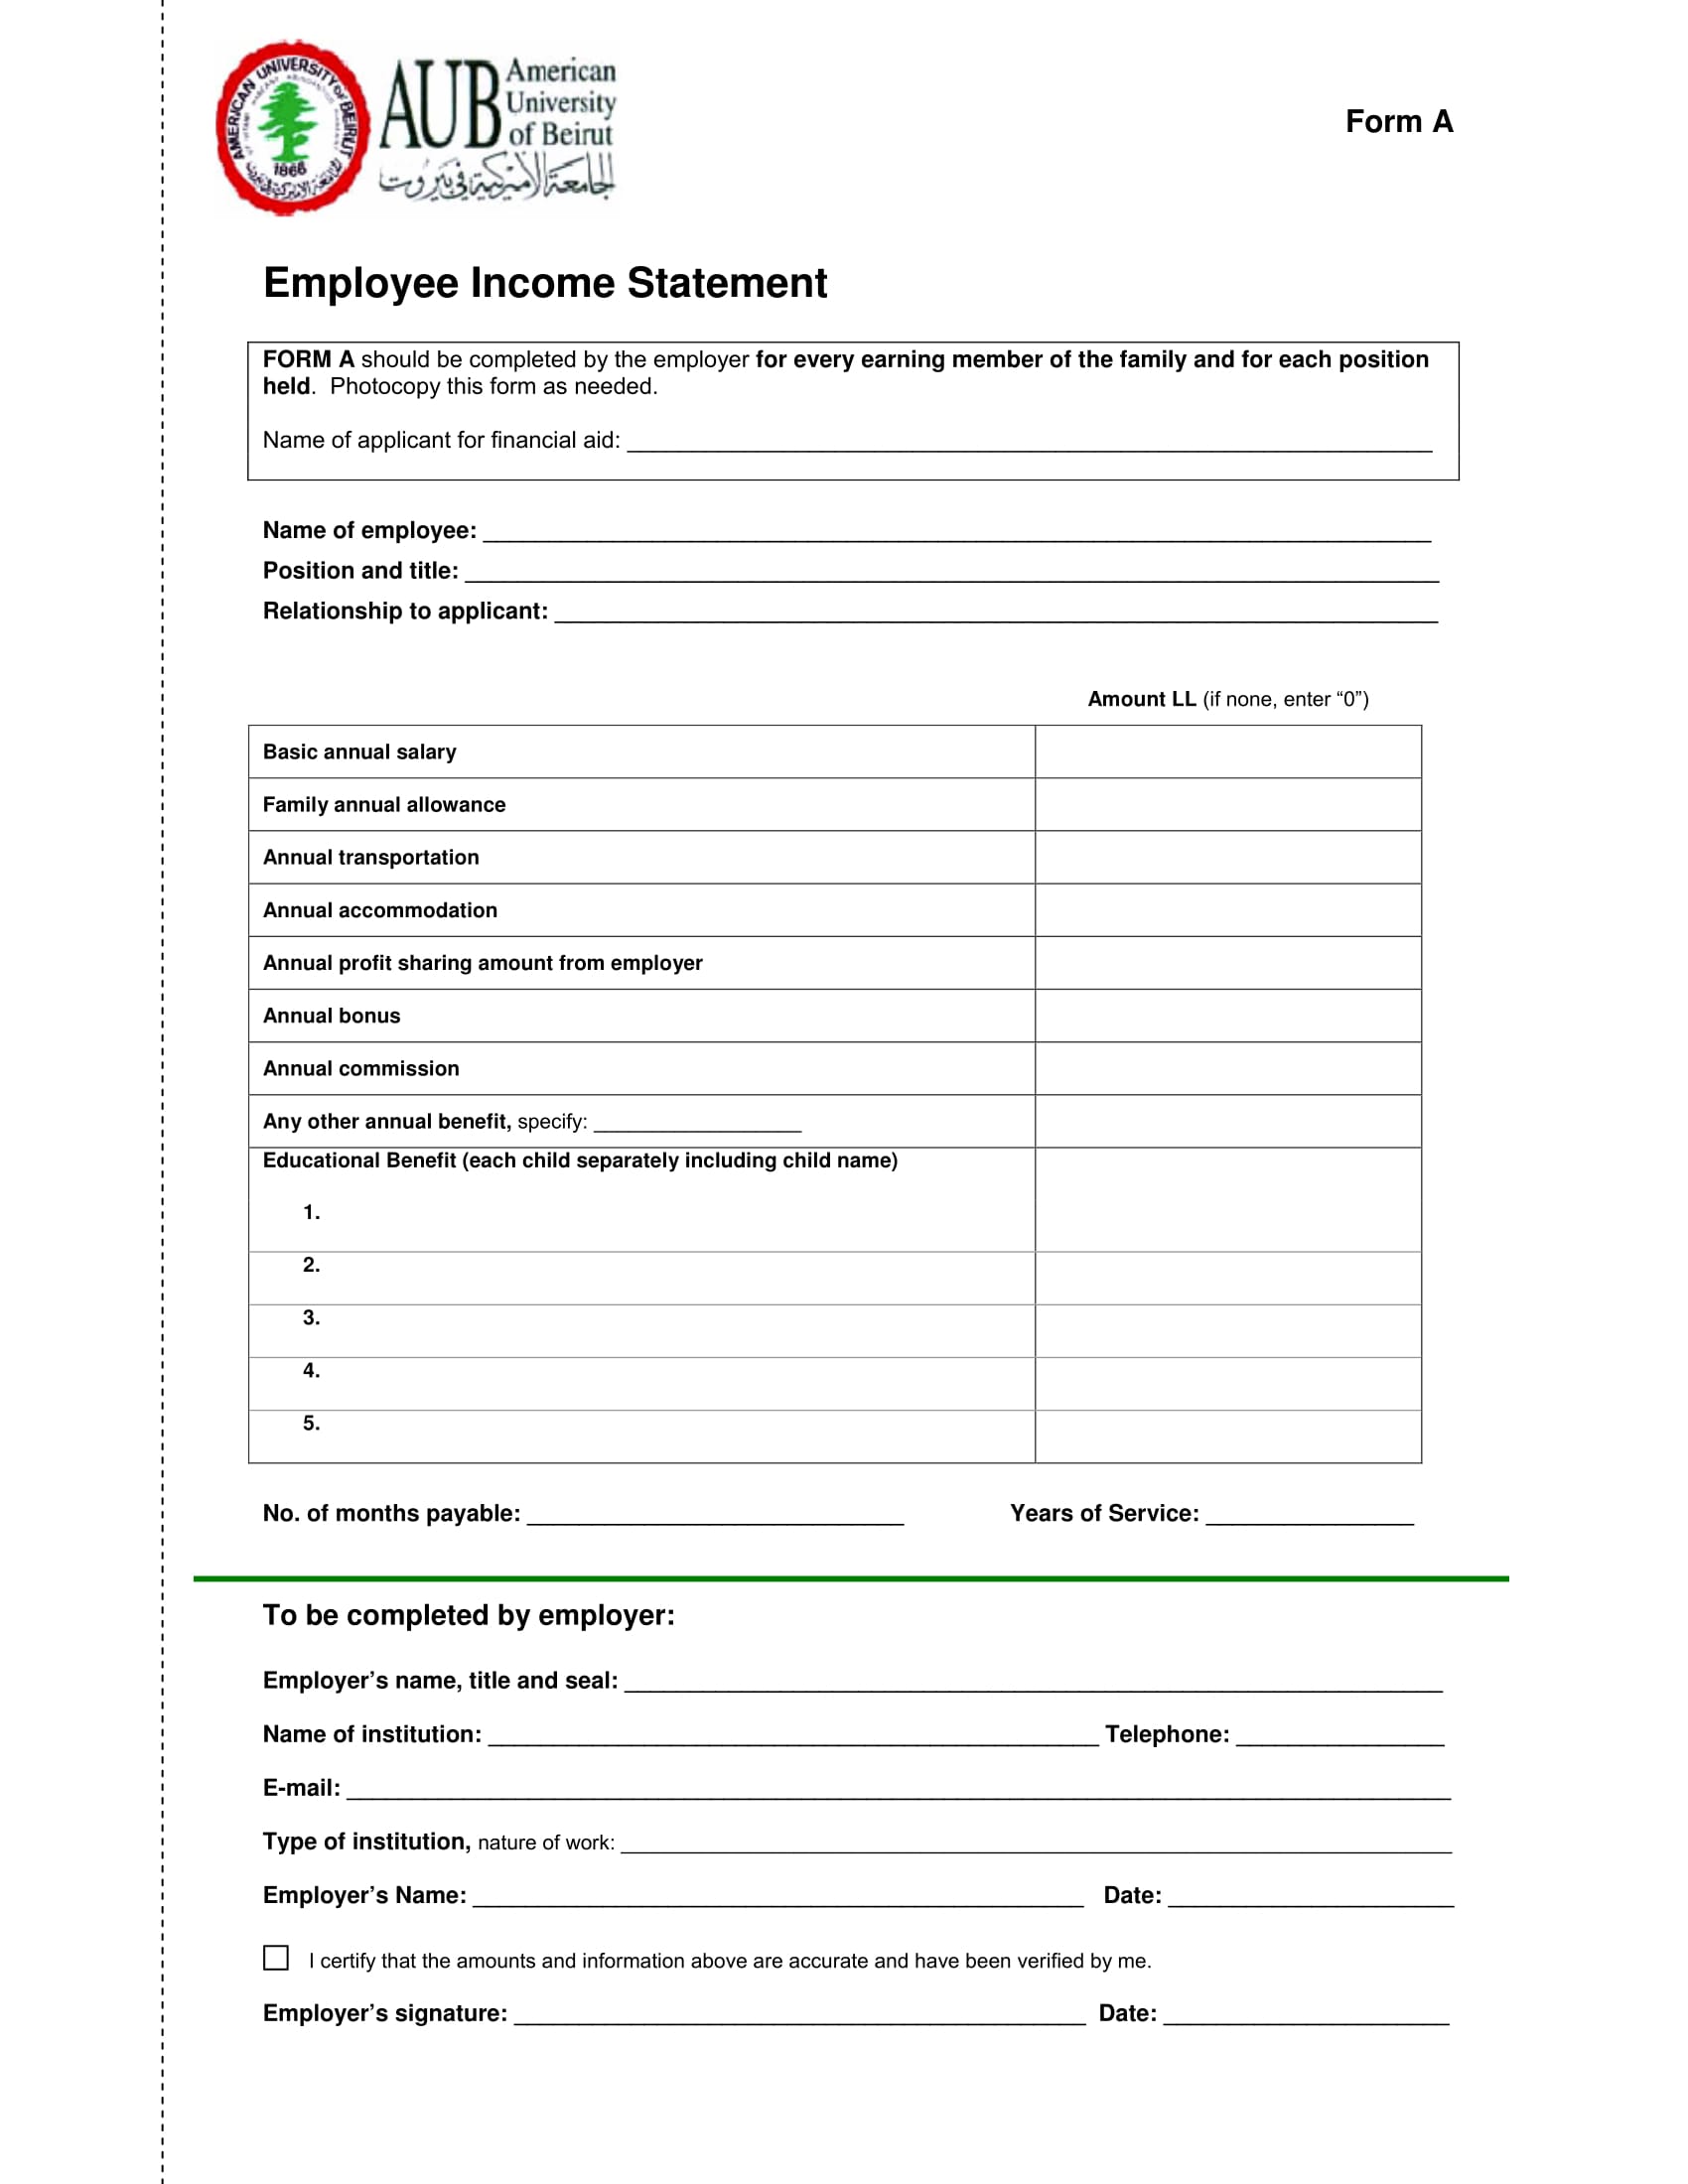 employee income statement form 1